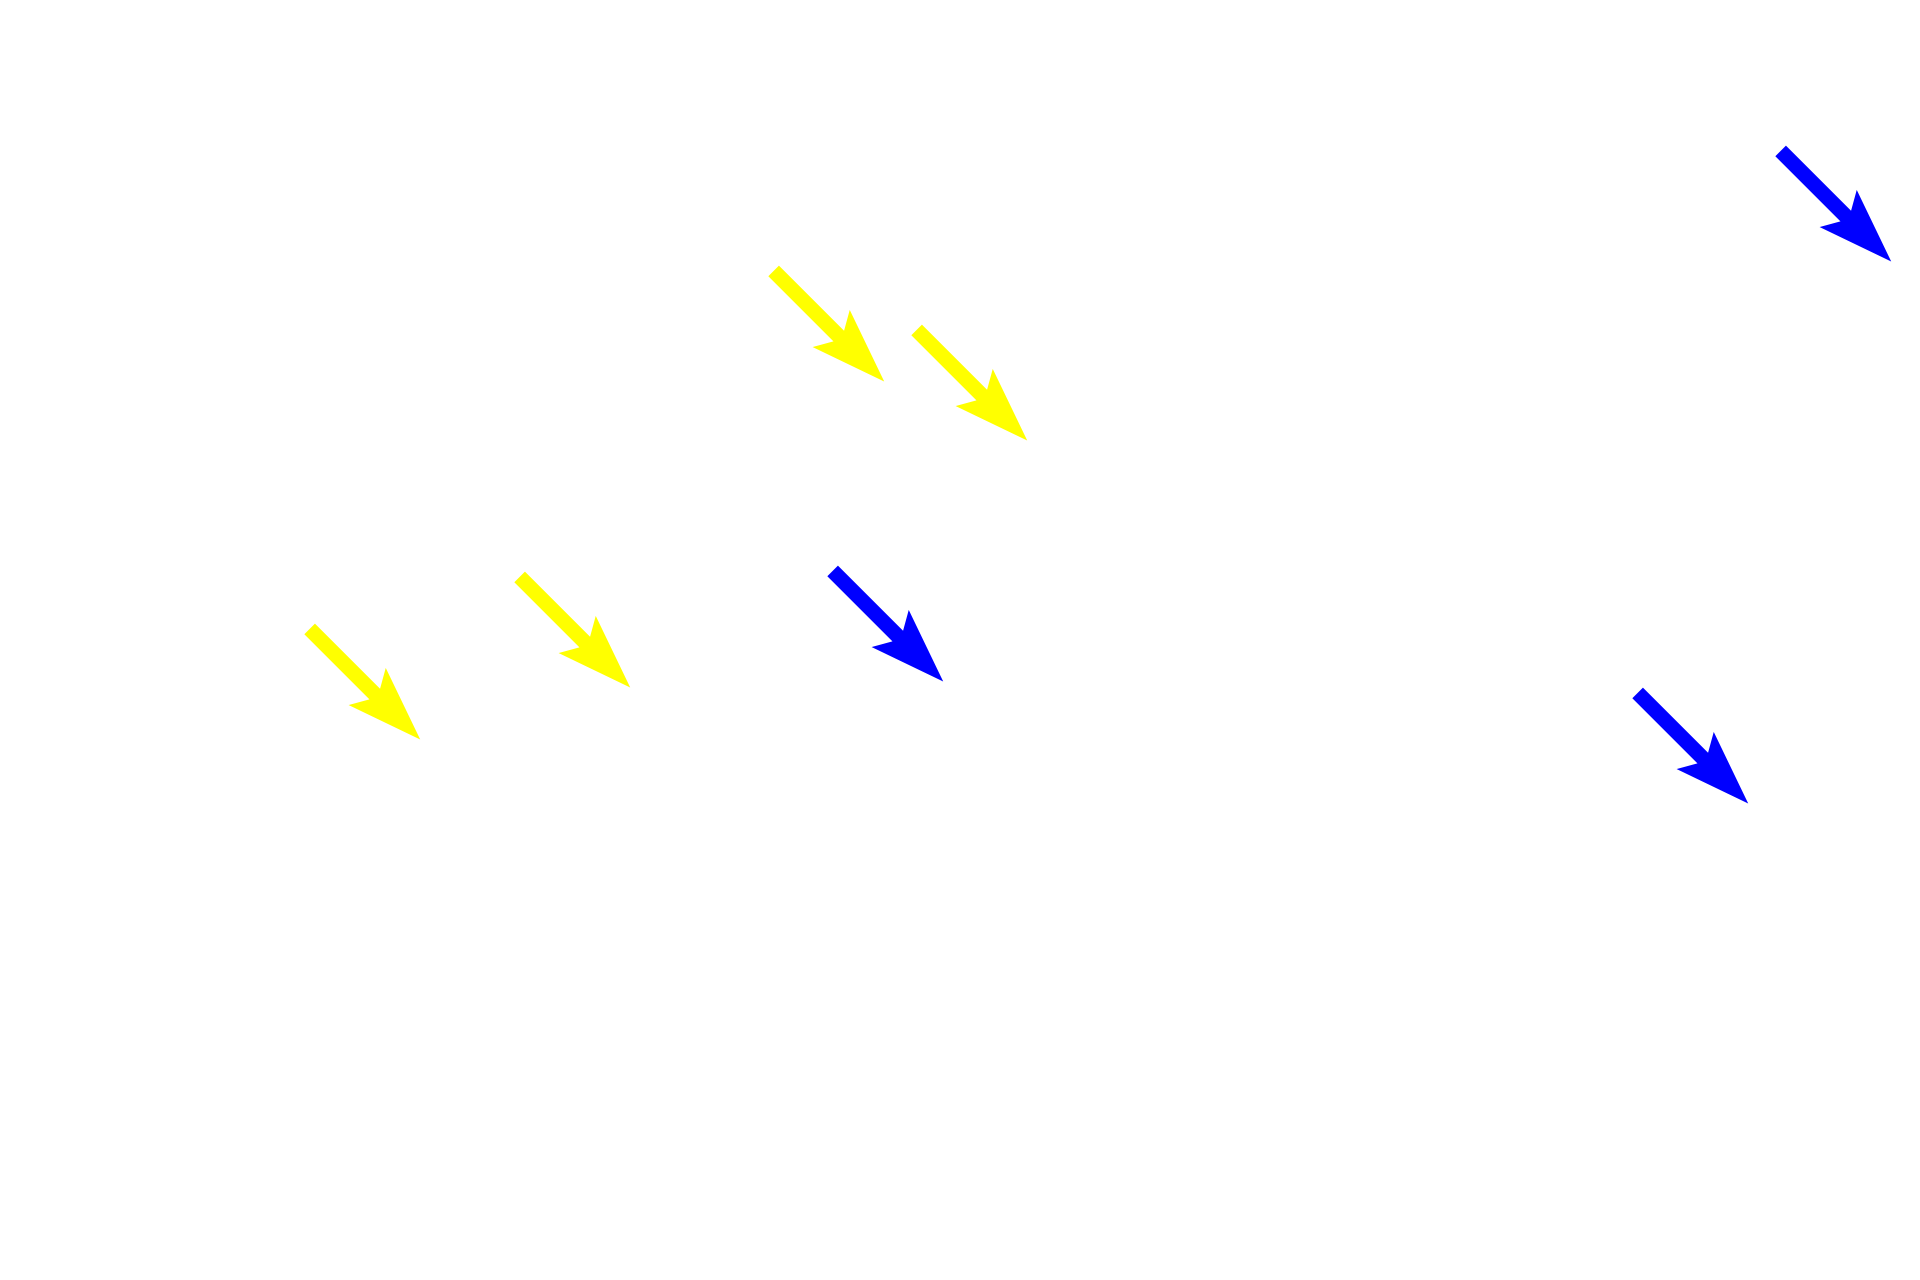 Ducts > <p>Intralobular ducts (yellow arrows), located entirely within a lobule, drain the secretory units of a compound gland.  Intralobular ducts merge to form interlobular ducts (blue arrows) that drain multiple lobules and are located in the intervening connective tissue.</p>
